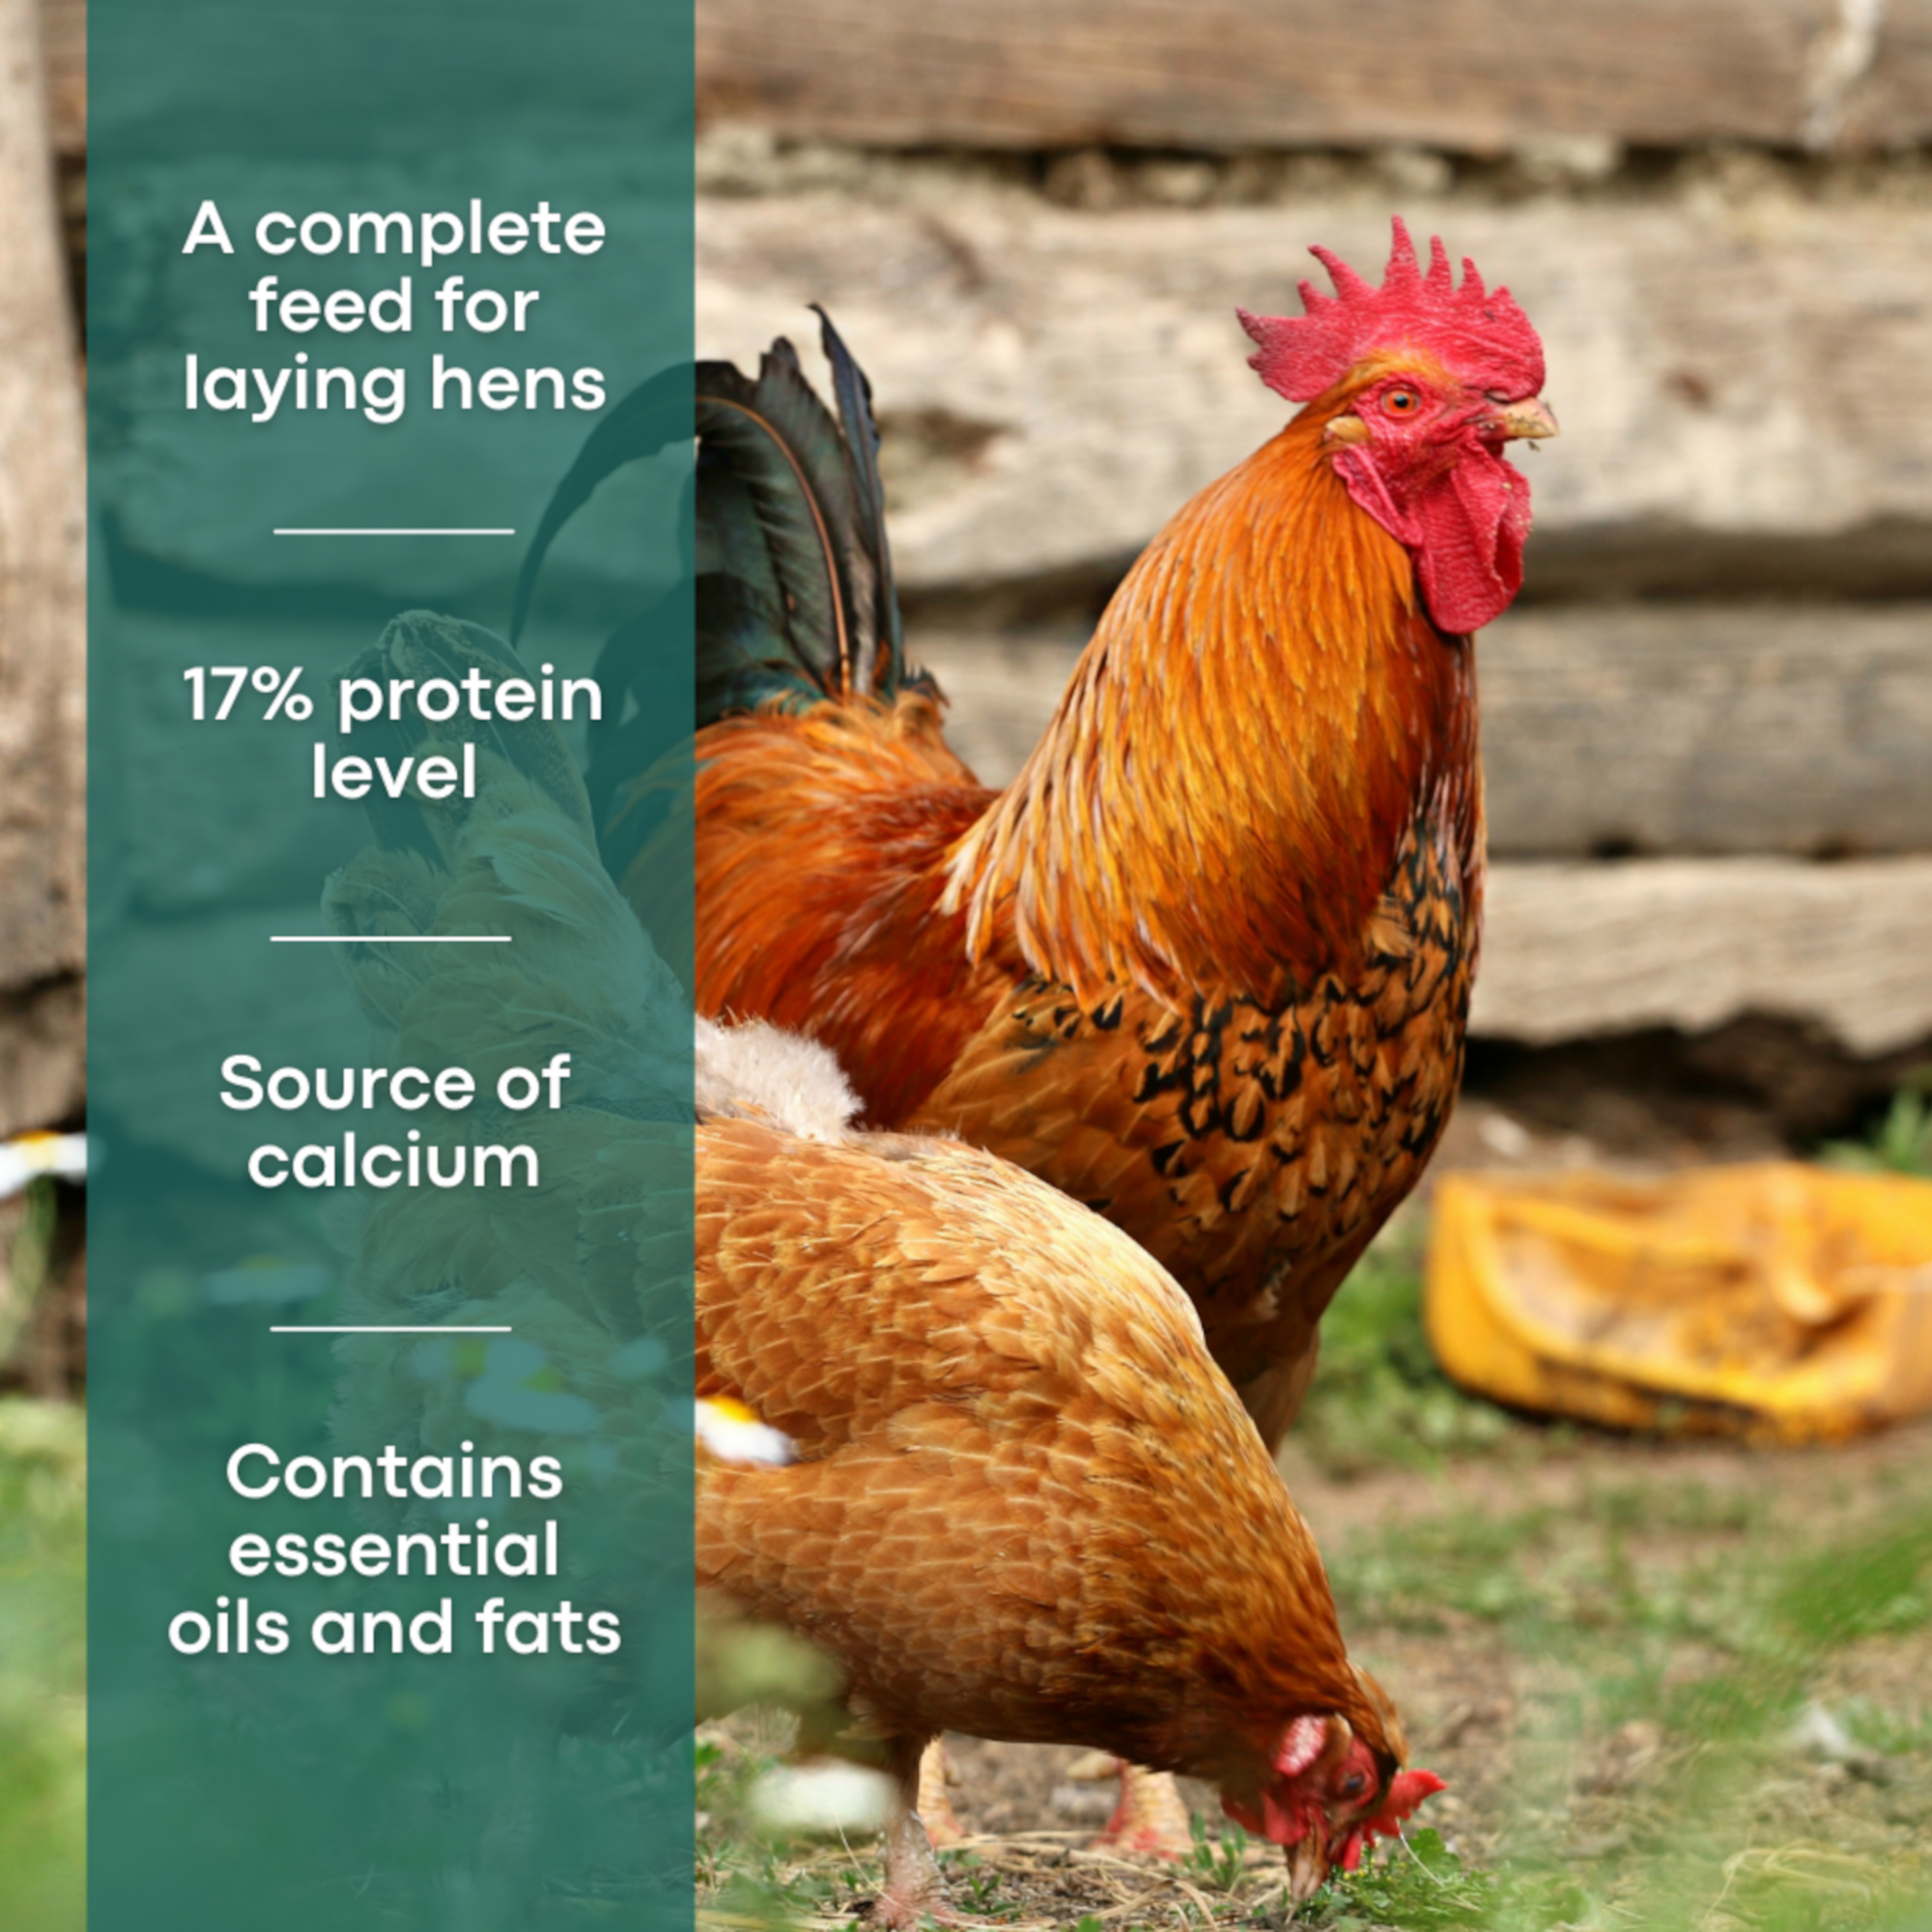 1. A complete feed for laying hens. 2. 17% protein level. 3. Source of calcium. 4. Contains essential oils and fats.